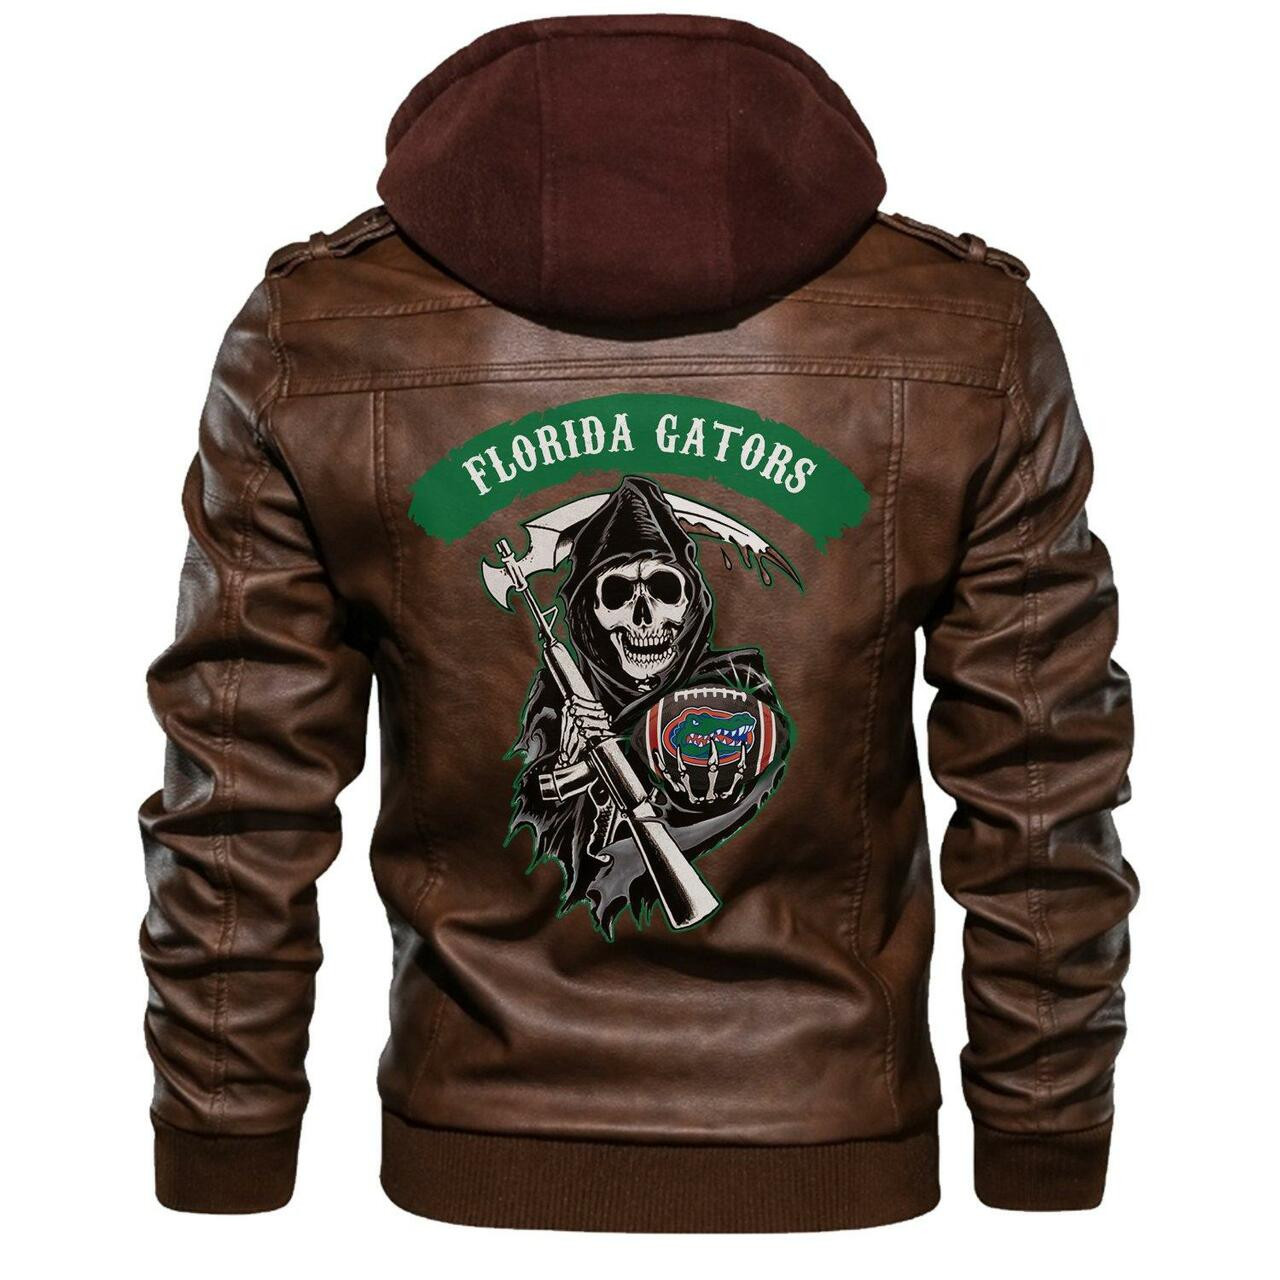 Our store has all of the latest leather jacket 22